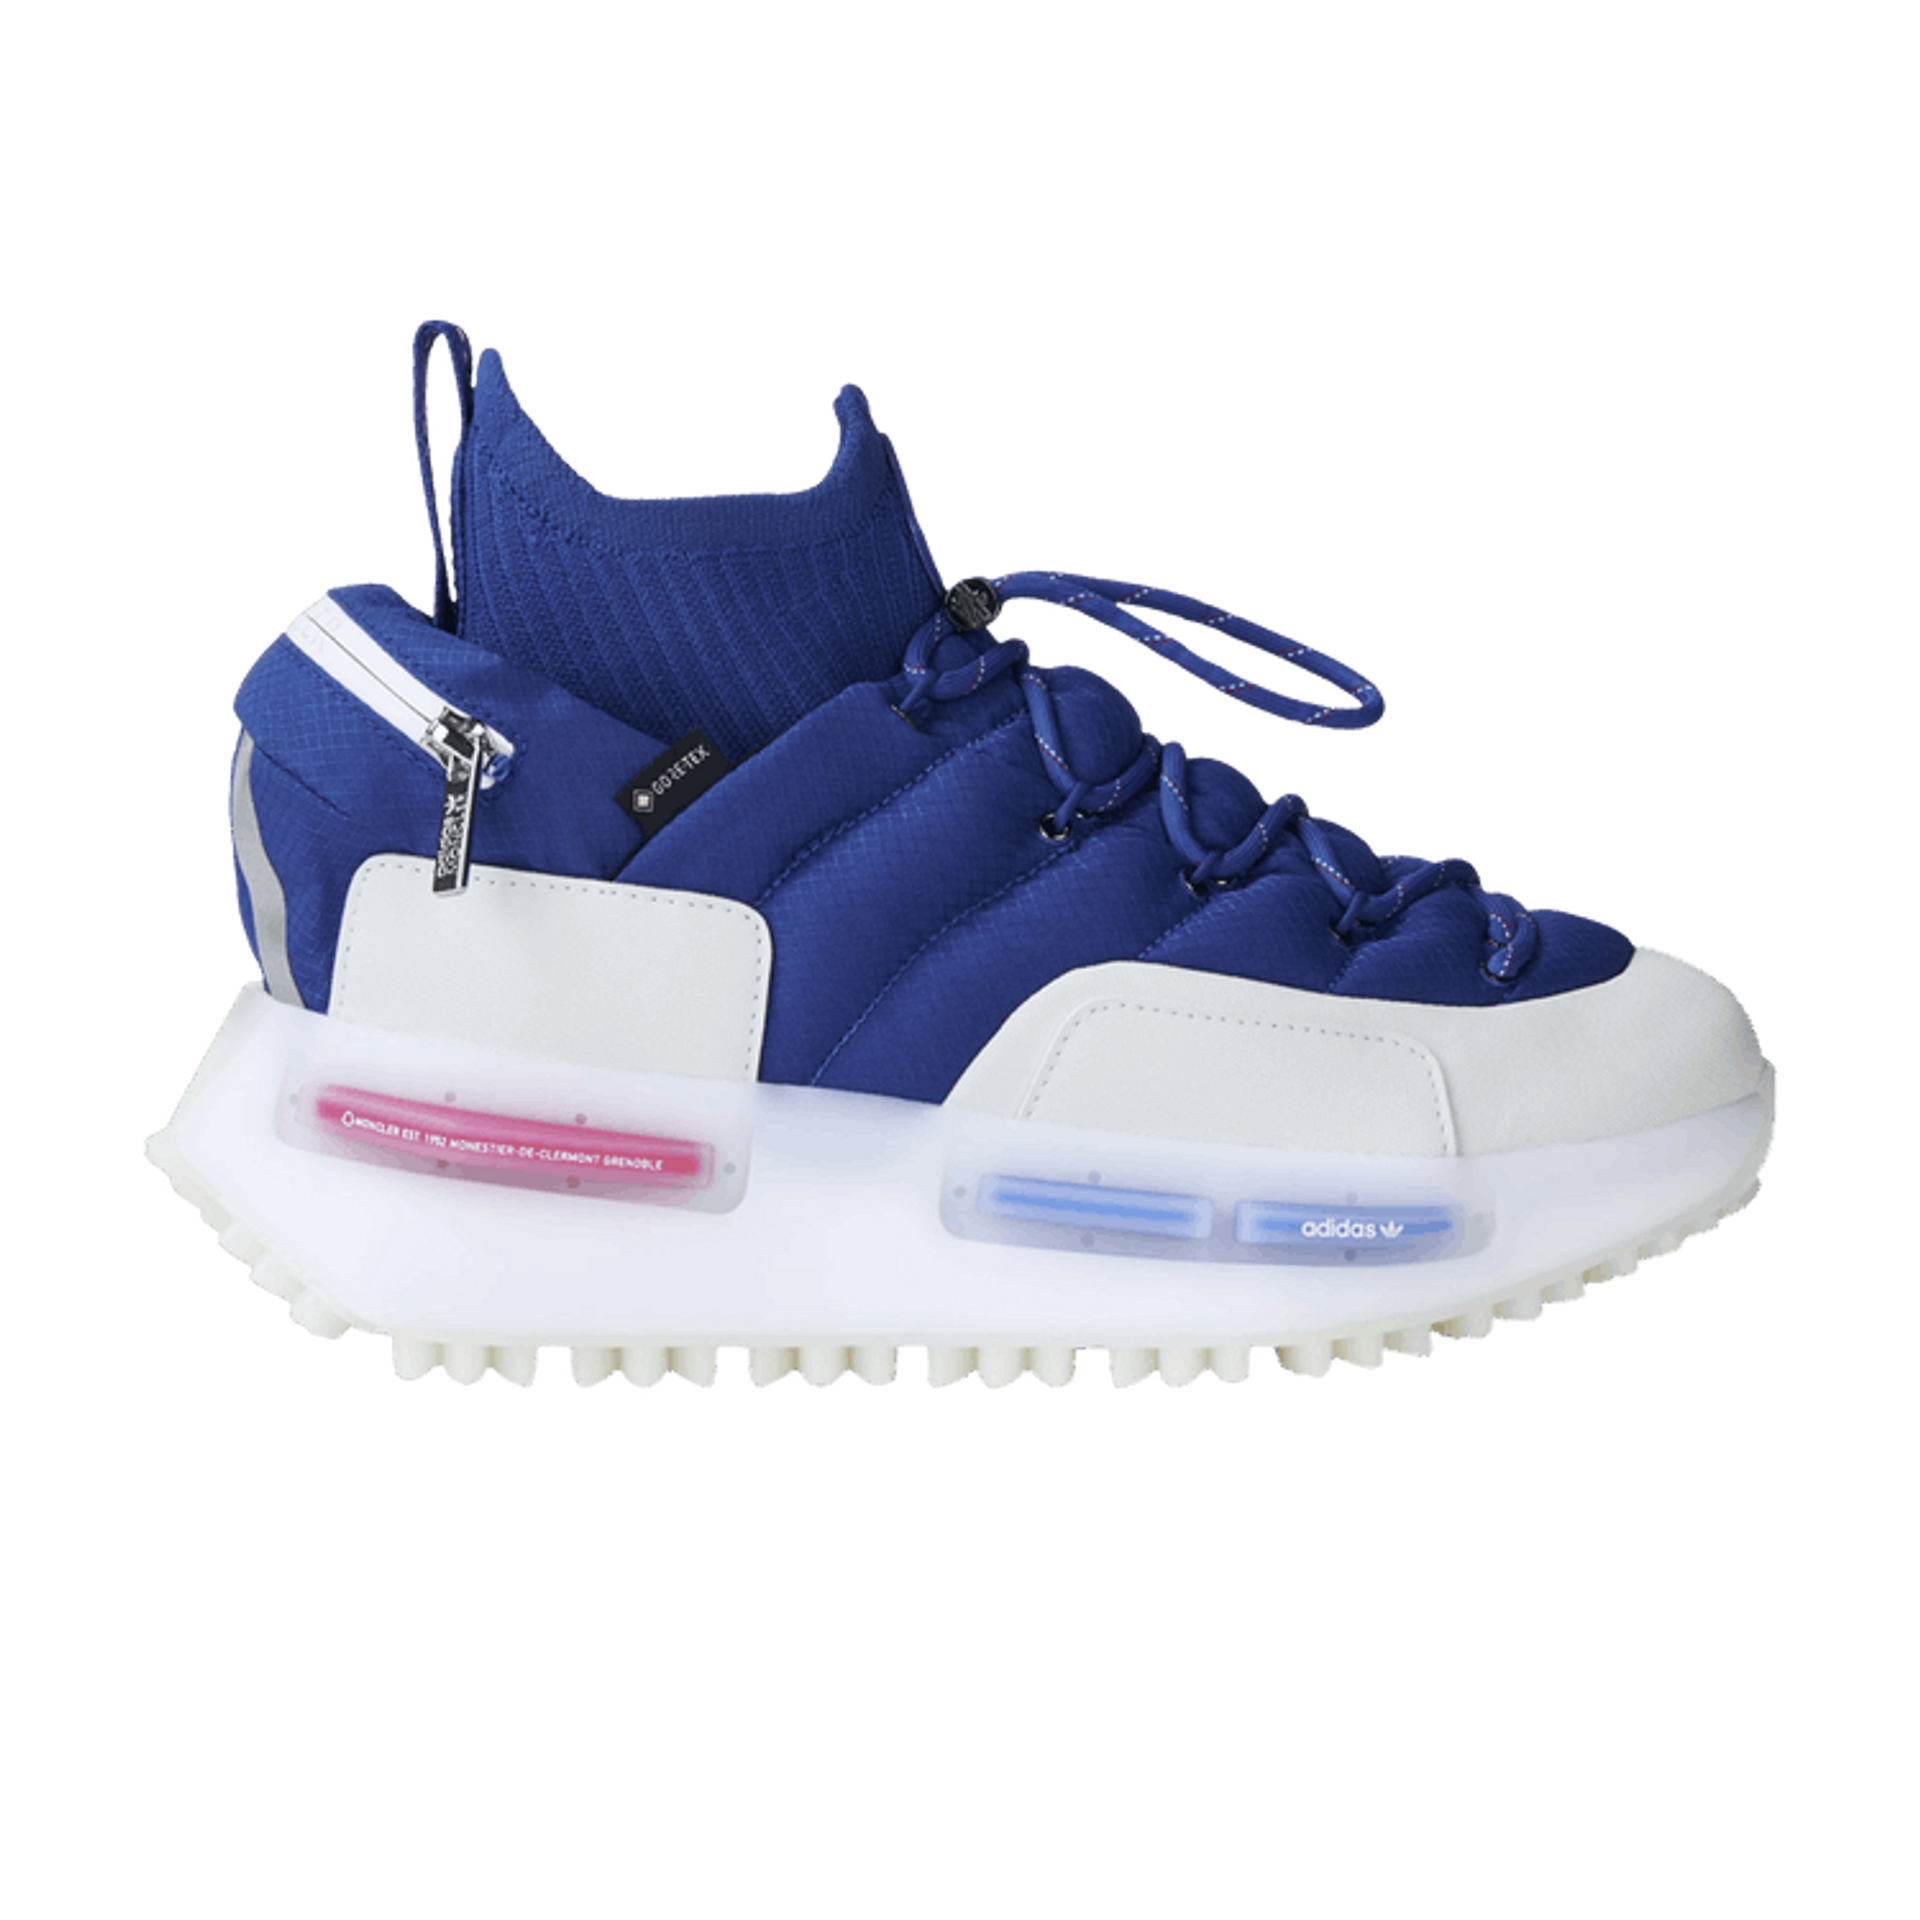 Moncler x adidas NMD_S1 GORE-TEX 'The Art of Exploration - Royal Blue'